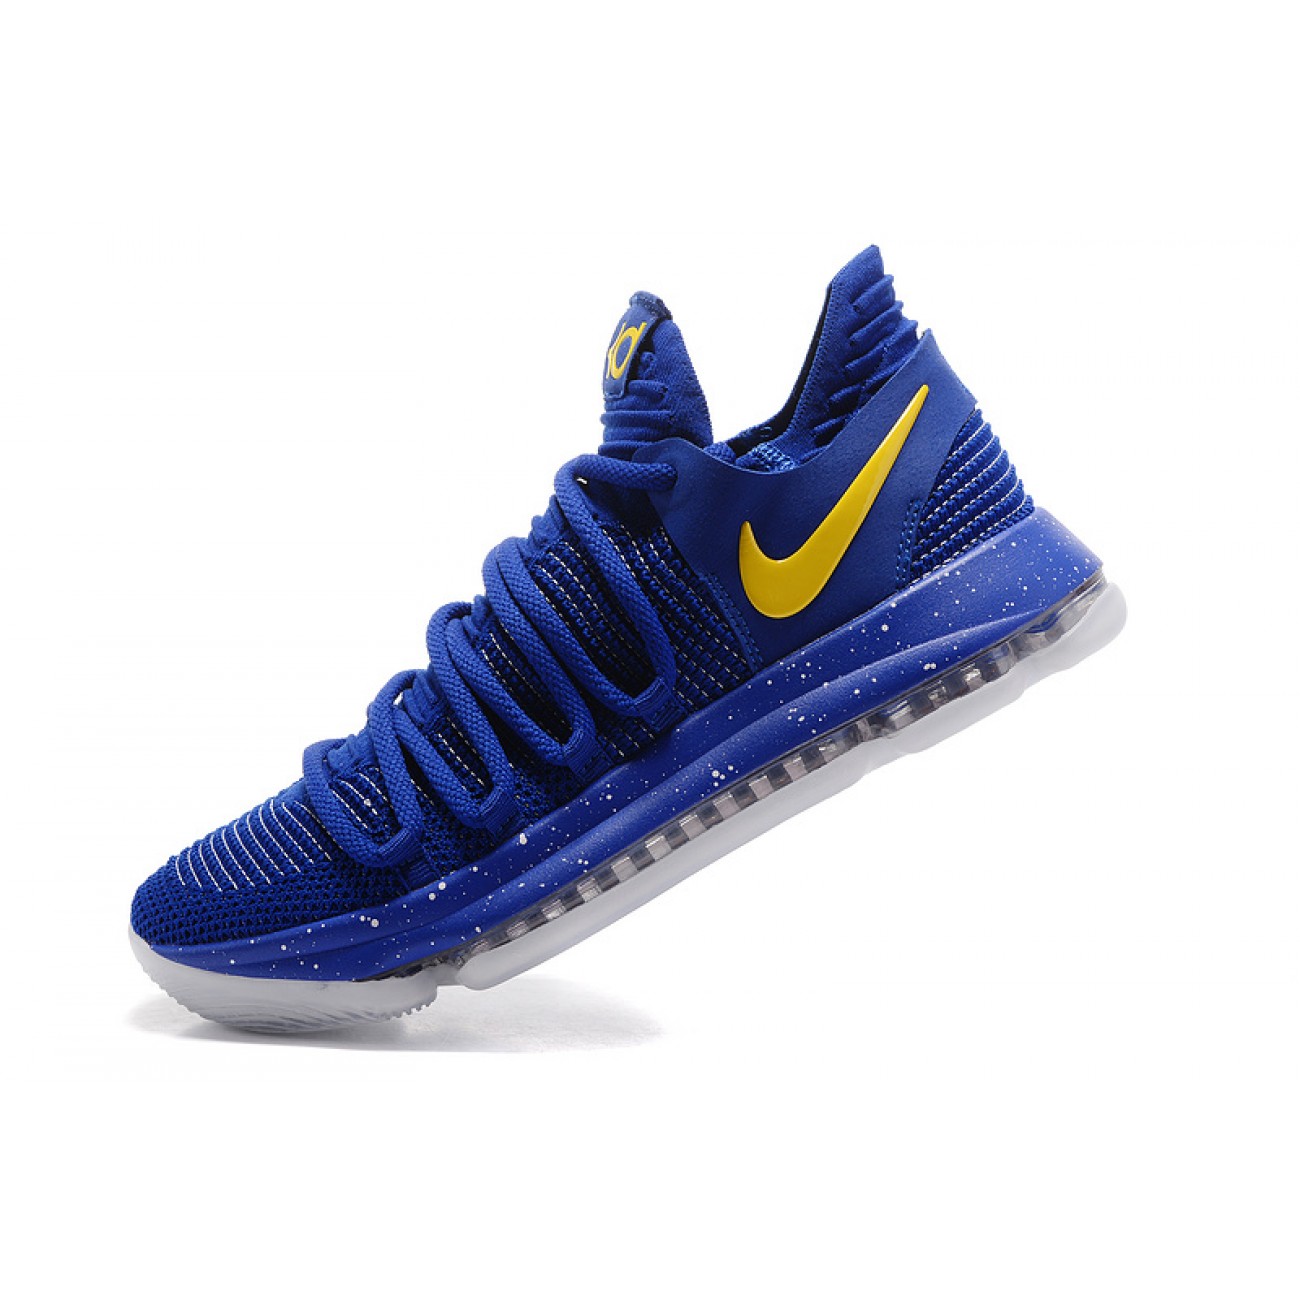 Kevin Durant KD10 "Braves" Blue/Yellow